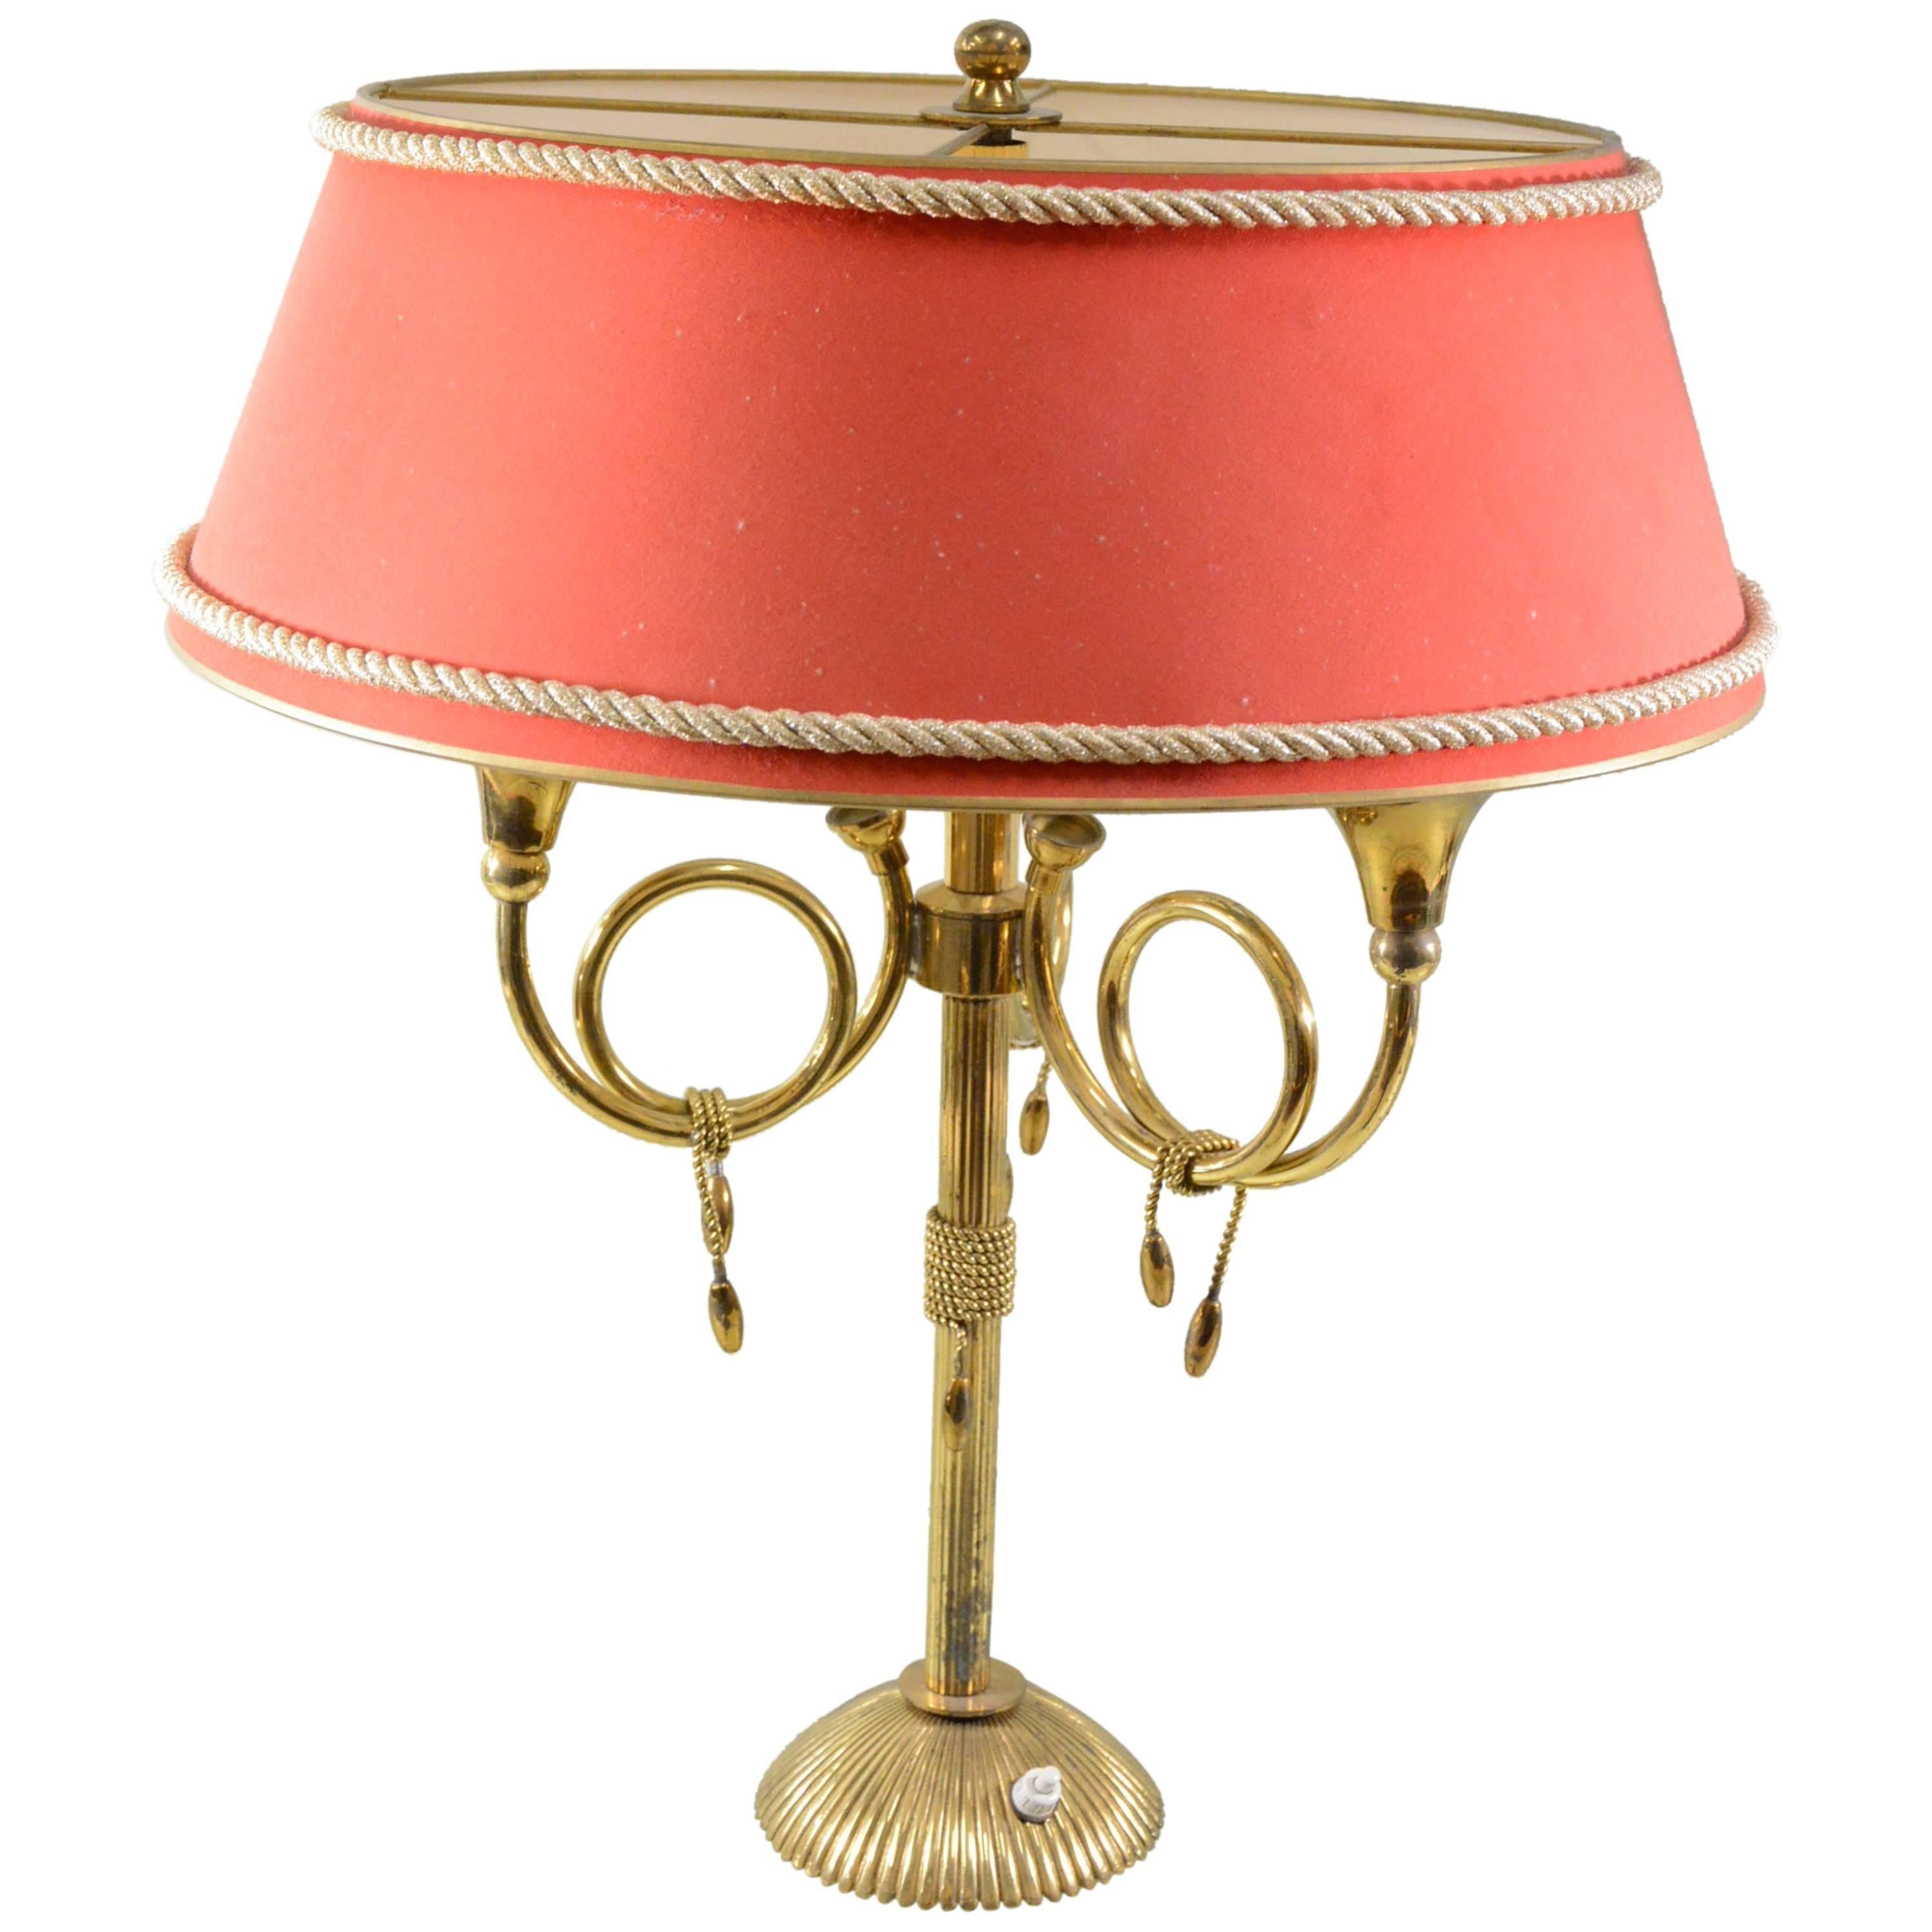 Neoclassical library lamp in brass with hunt design, circa 1950.